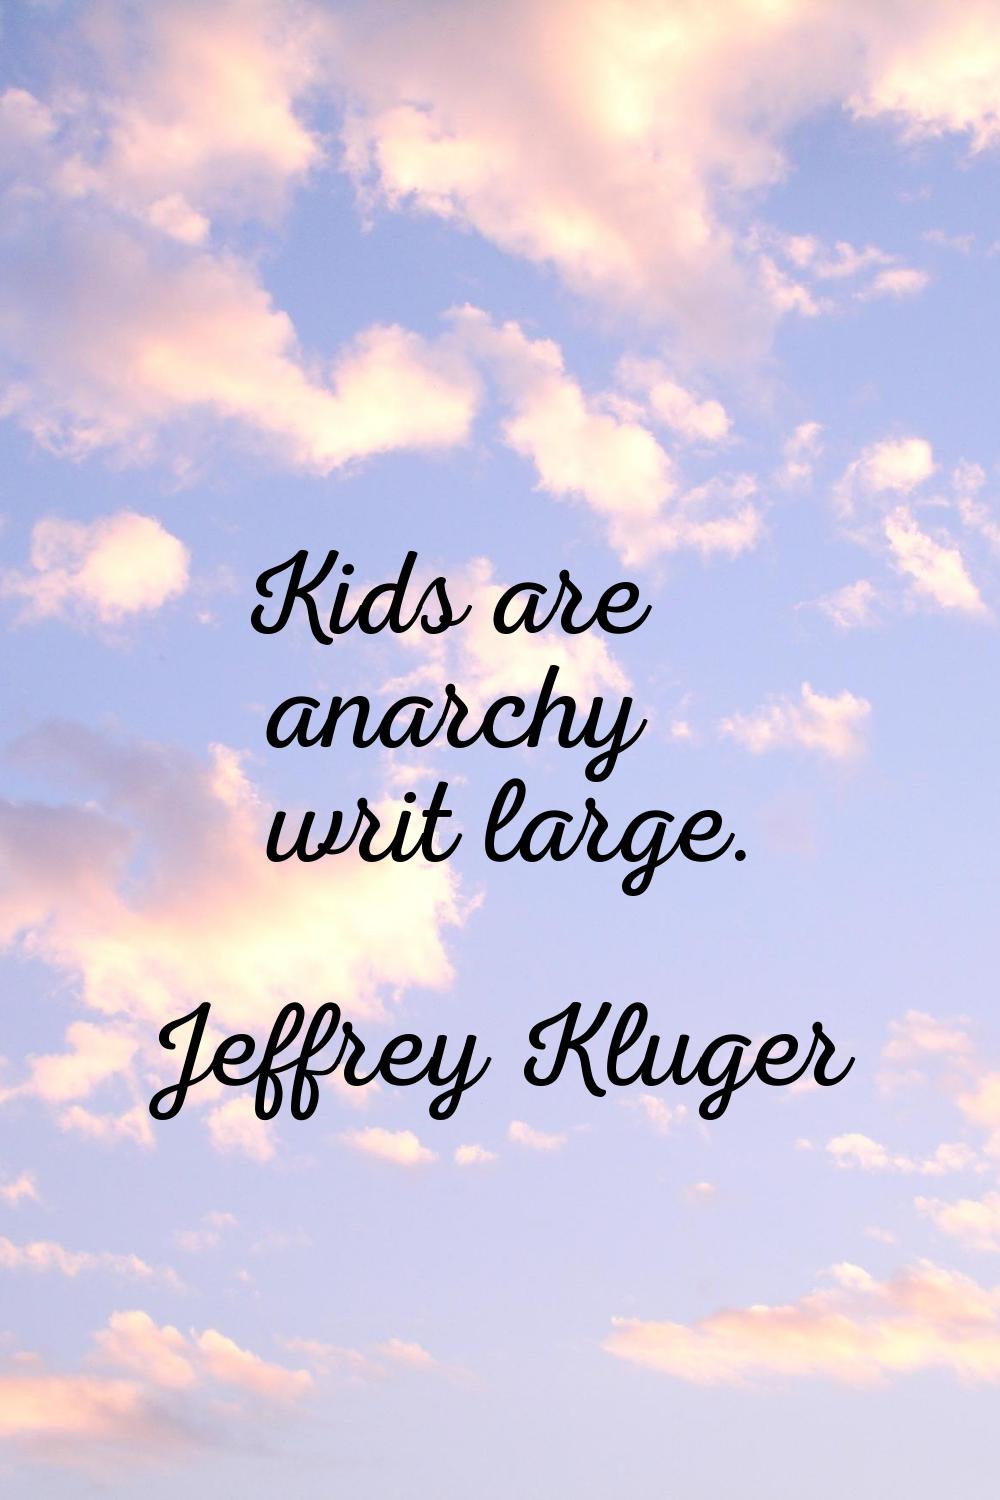 Kids are anarchy writ large.